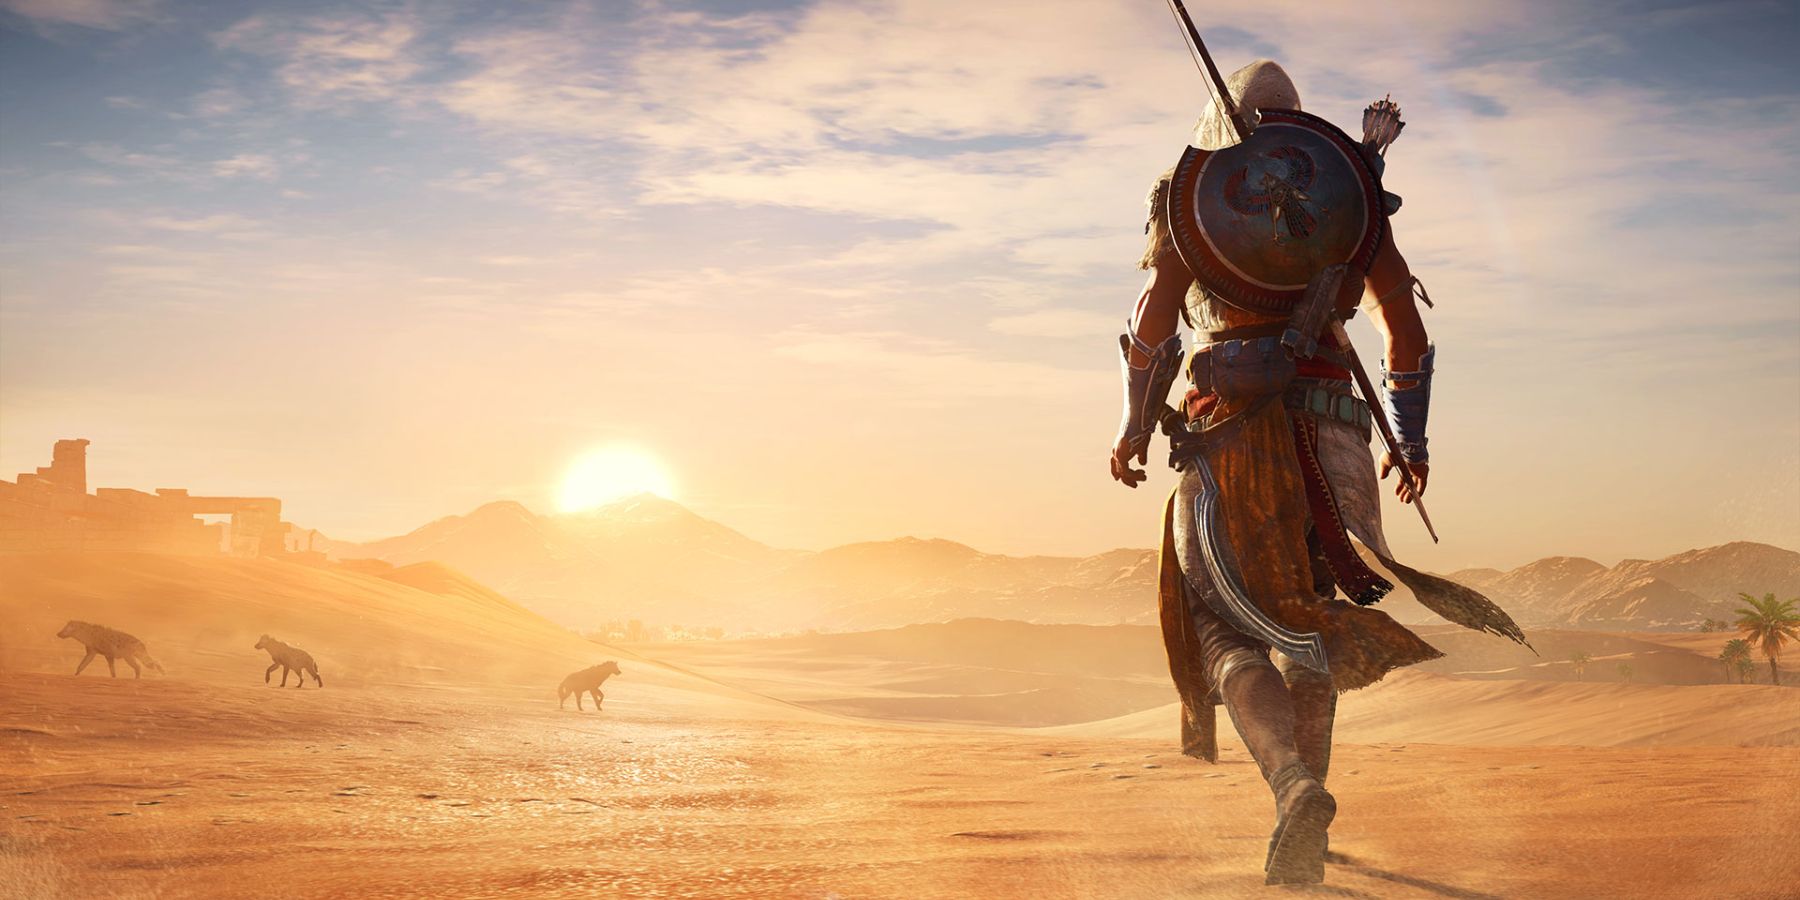 Bayek stands in the desert as the sun sets in Assassin's Creed: Origins